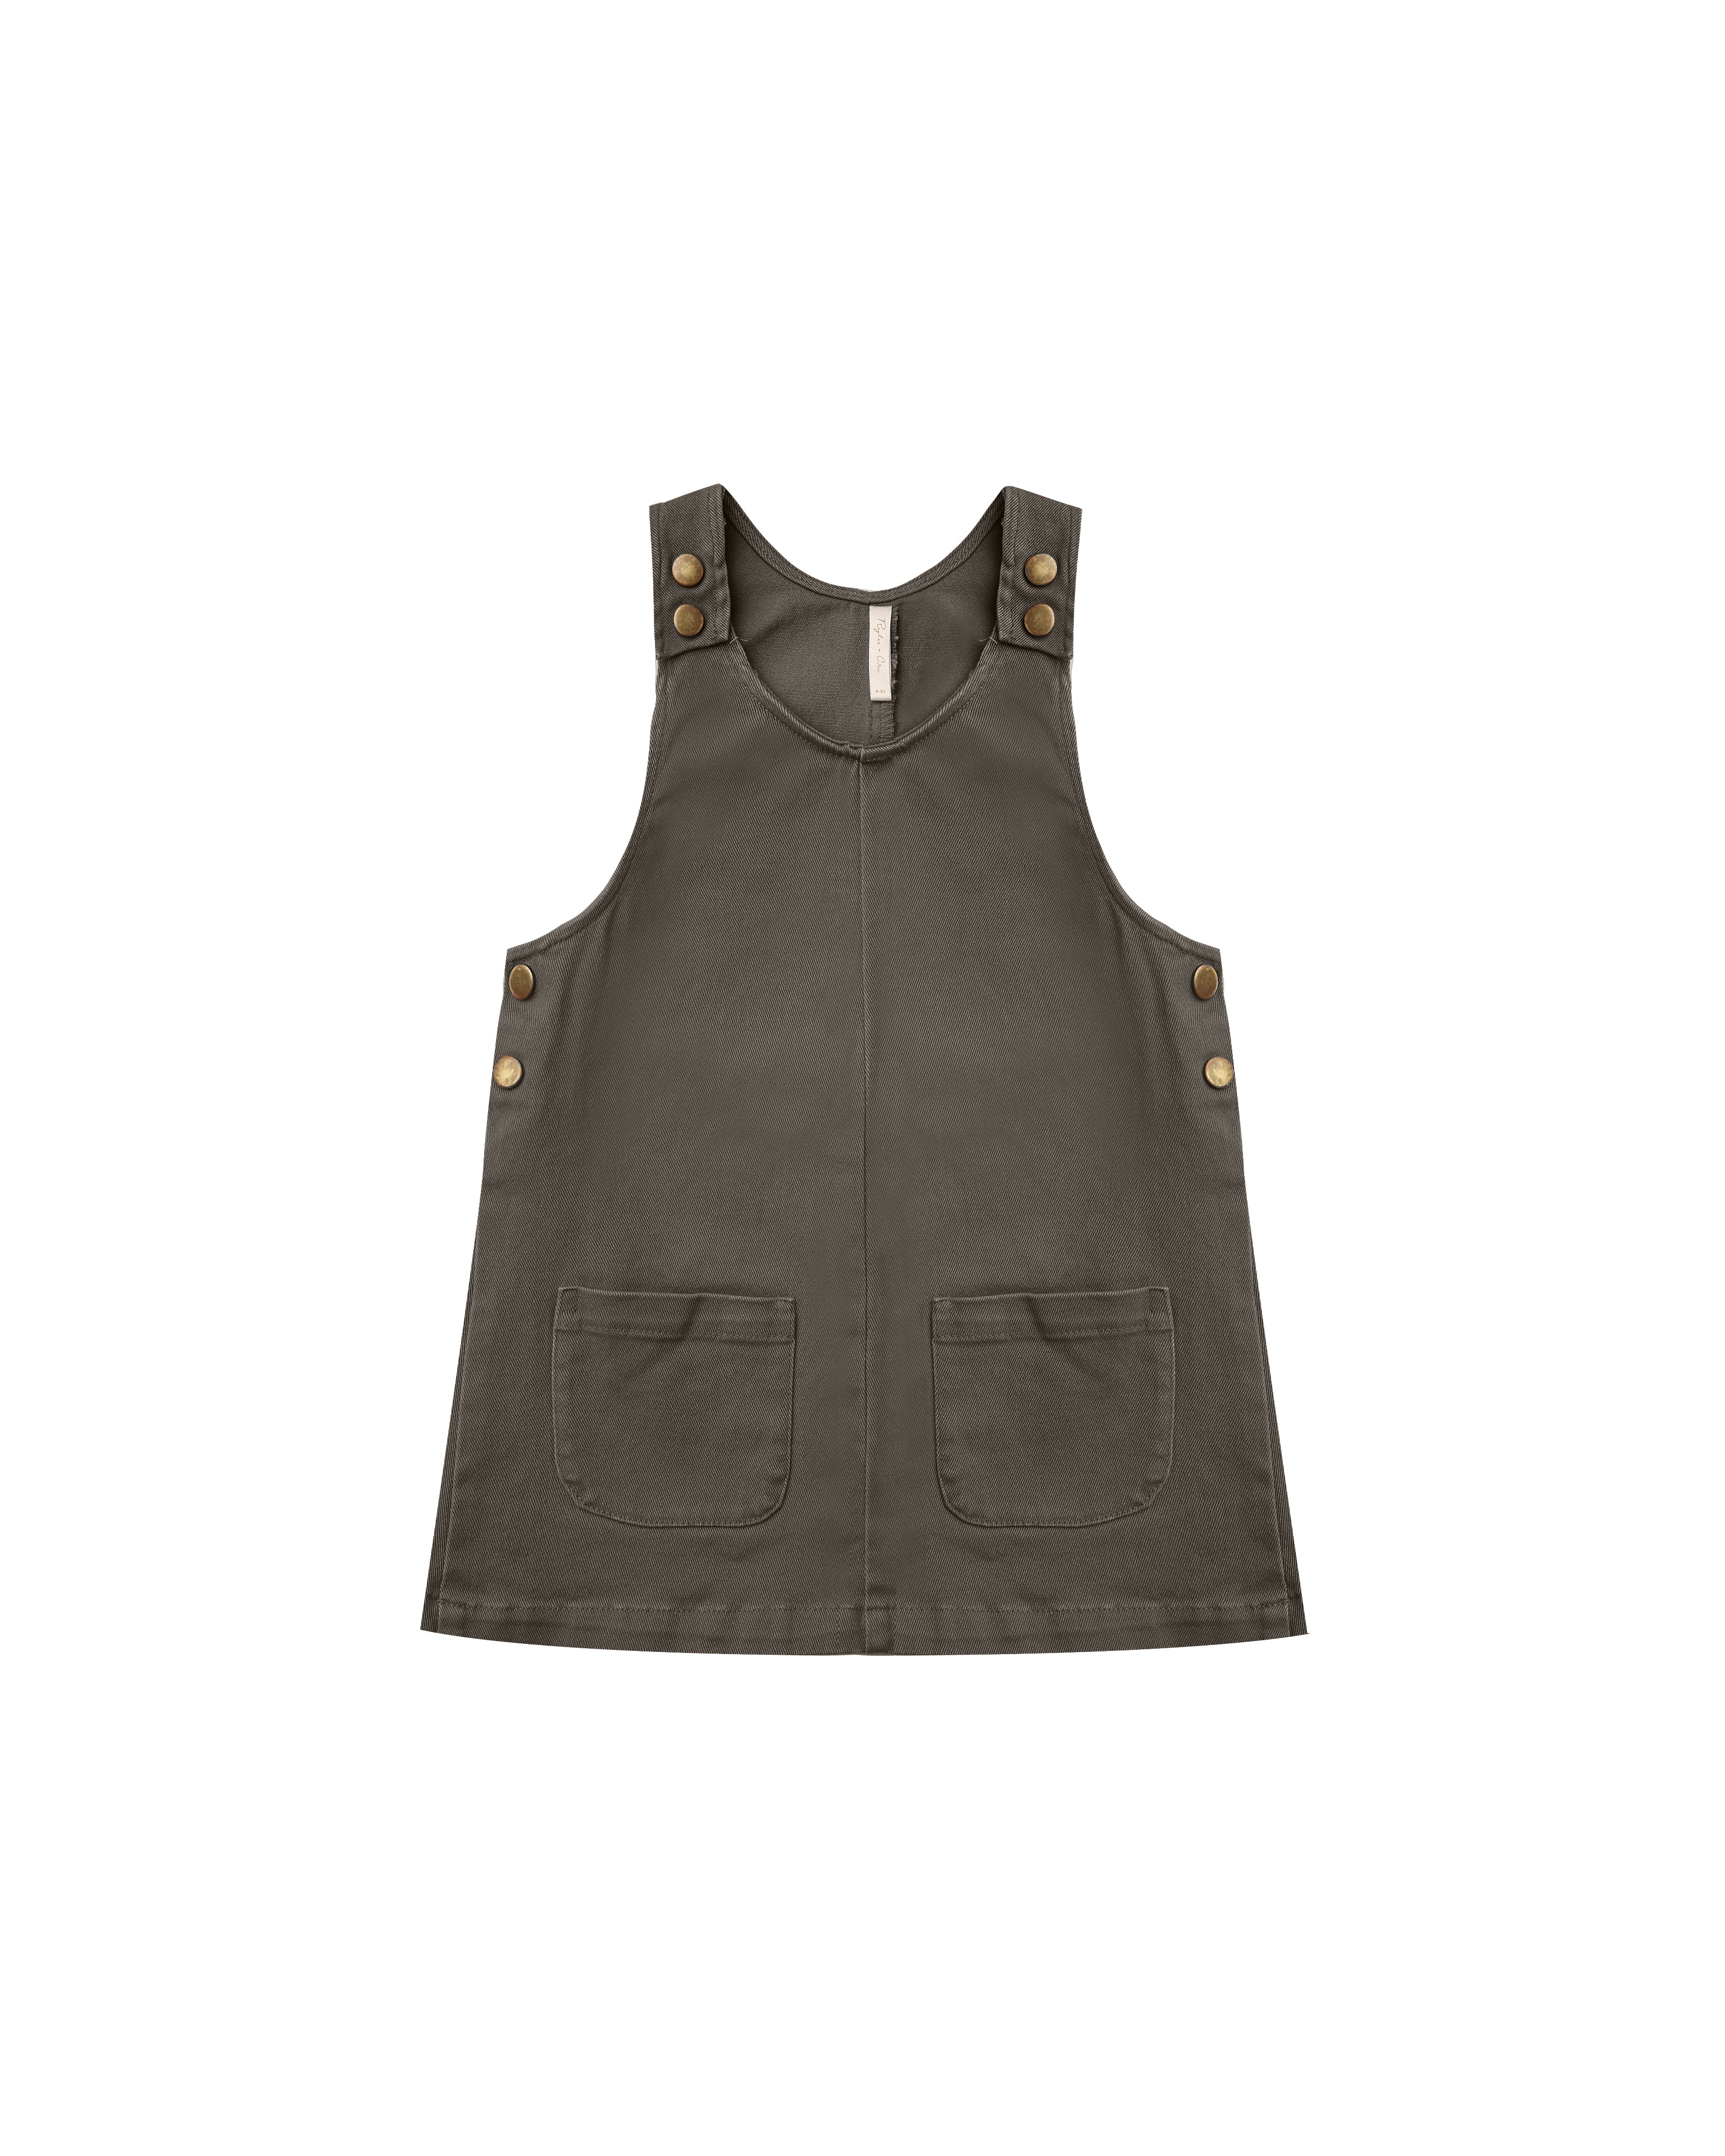 Rylee + Cru Odette Overall Dress - Charcoal